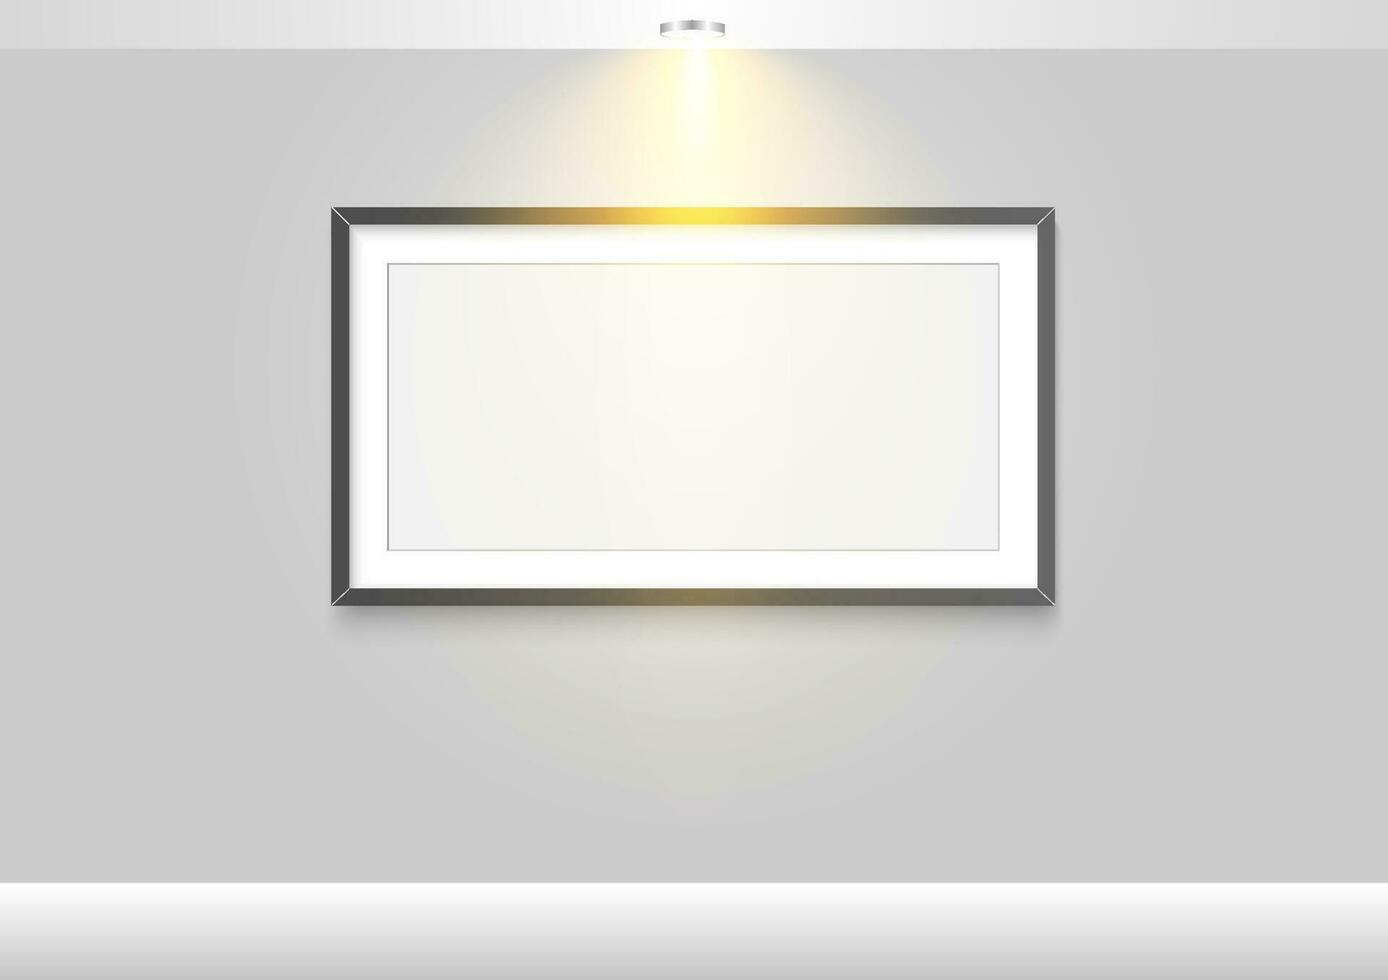 Empty frame. Wall art mock up with lighting. Ceiling lamp with light bulb. Object gallery interior graphic vector illustrator.